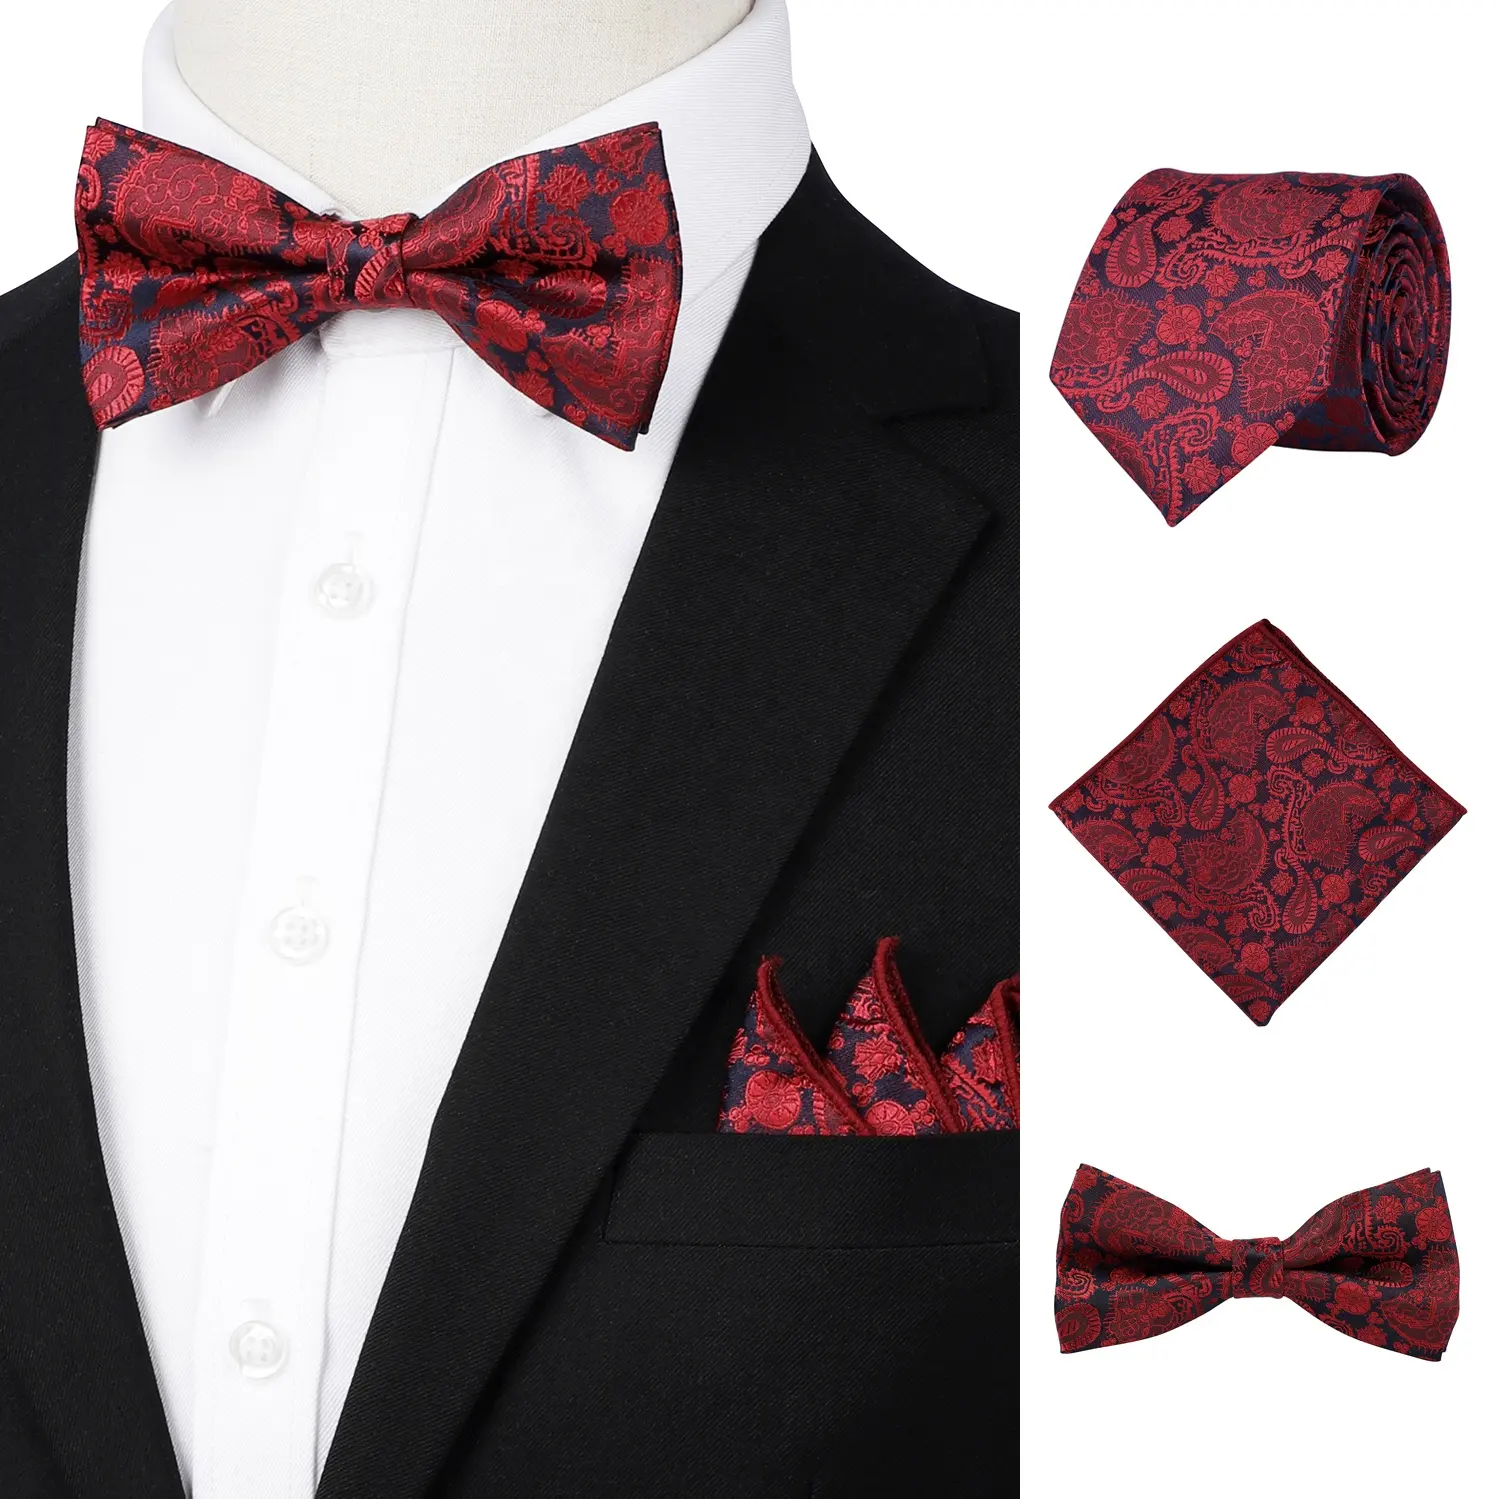 New Mens Necktie Sets Tie and Pocket Square Bow Tie Set 3 pcs Bowtie Set Stripe Mens Red Neck Ties and Handkerchief Man Gift